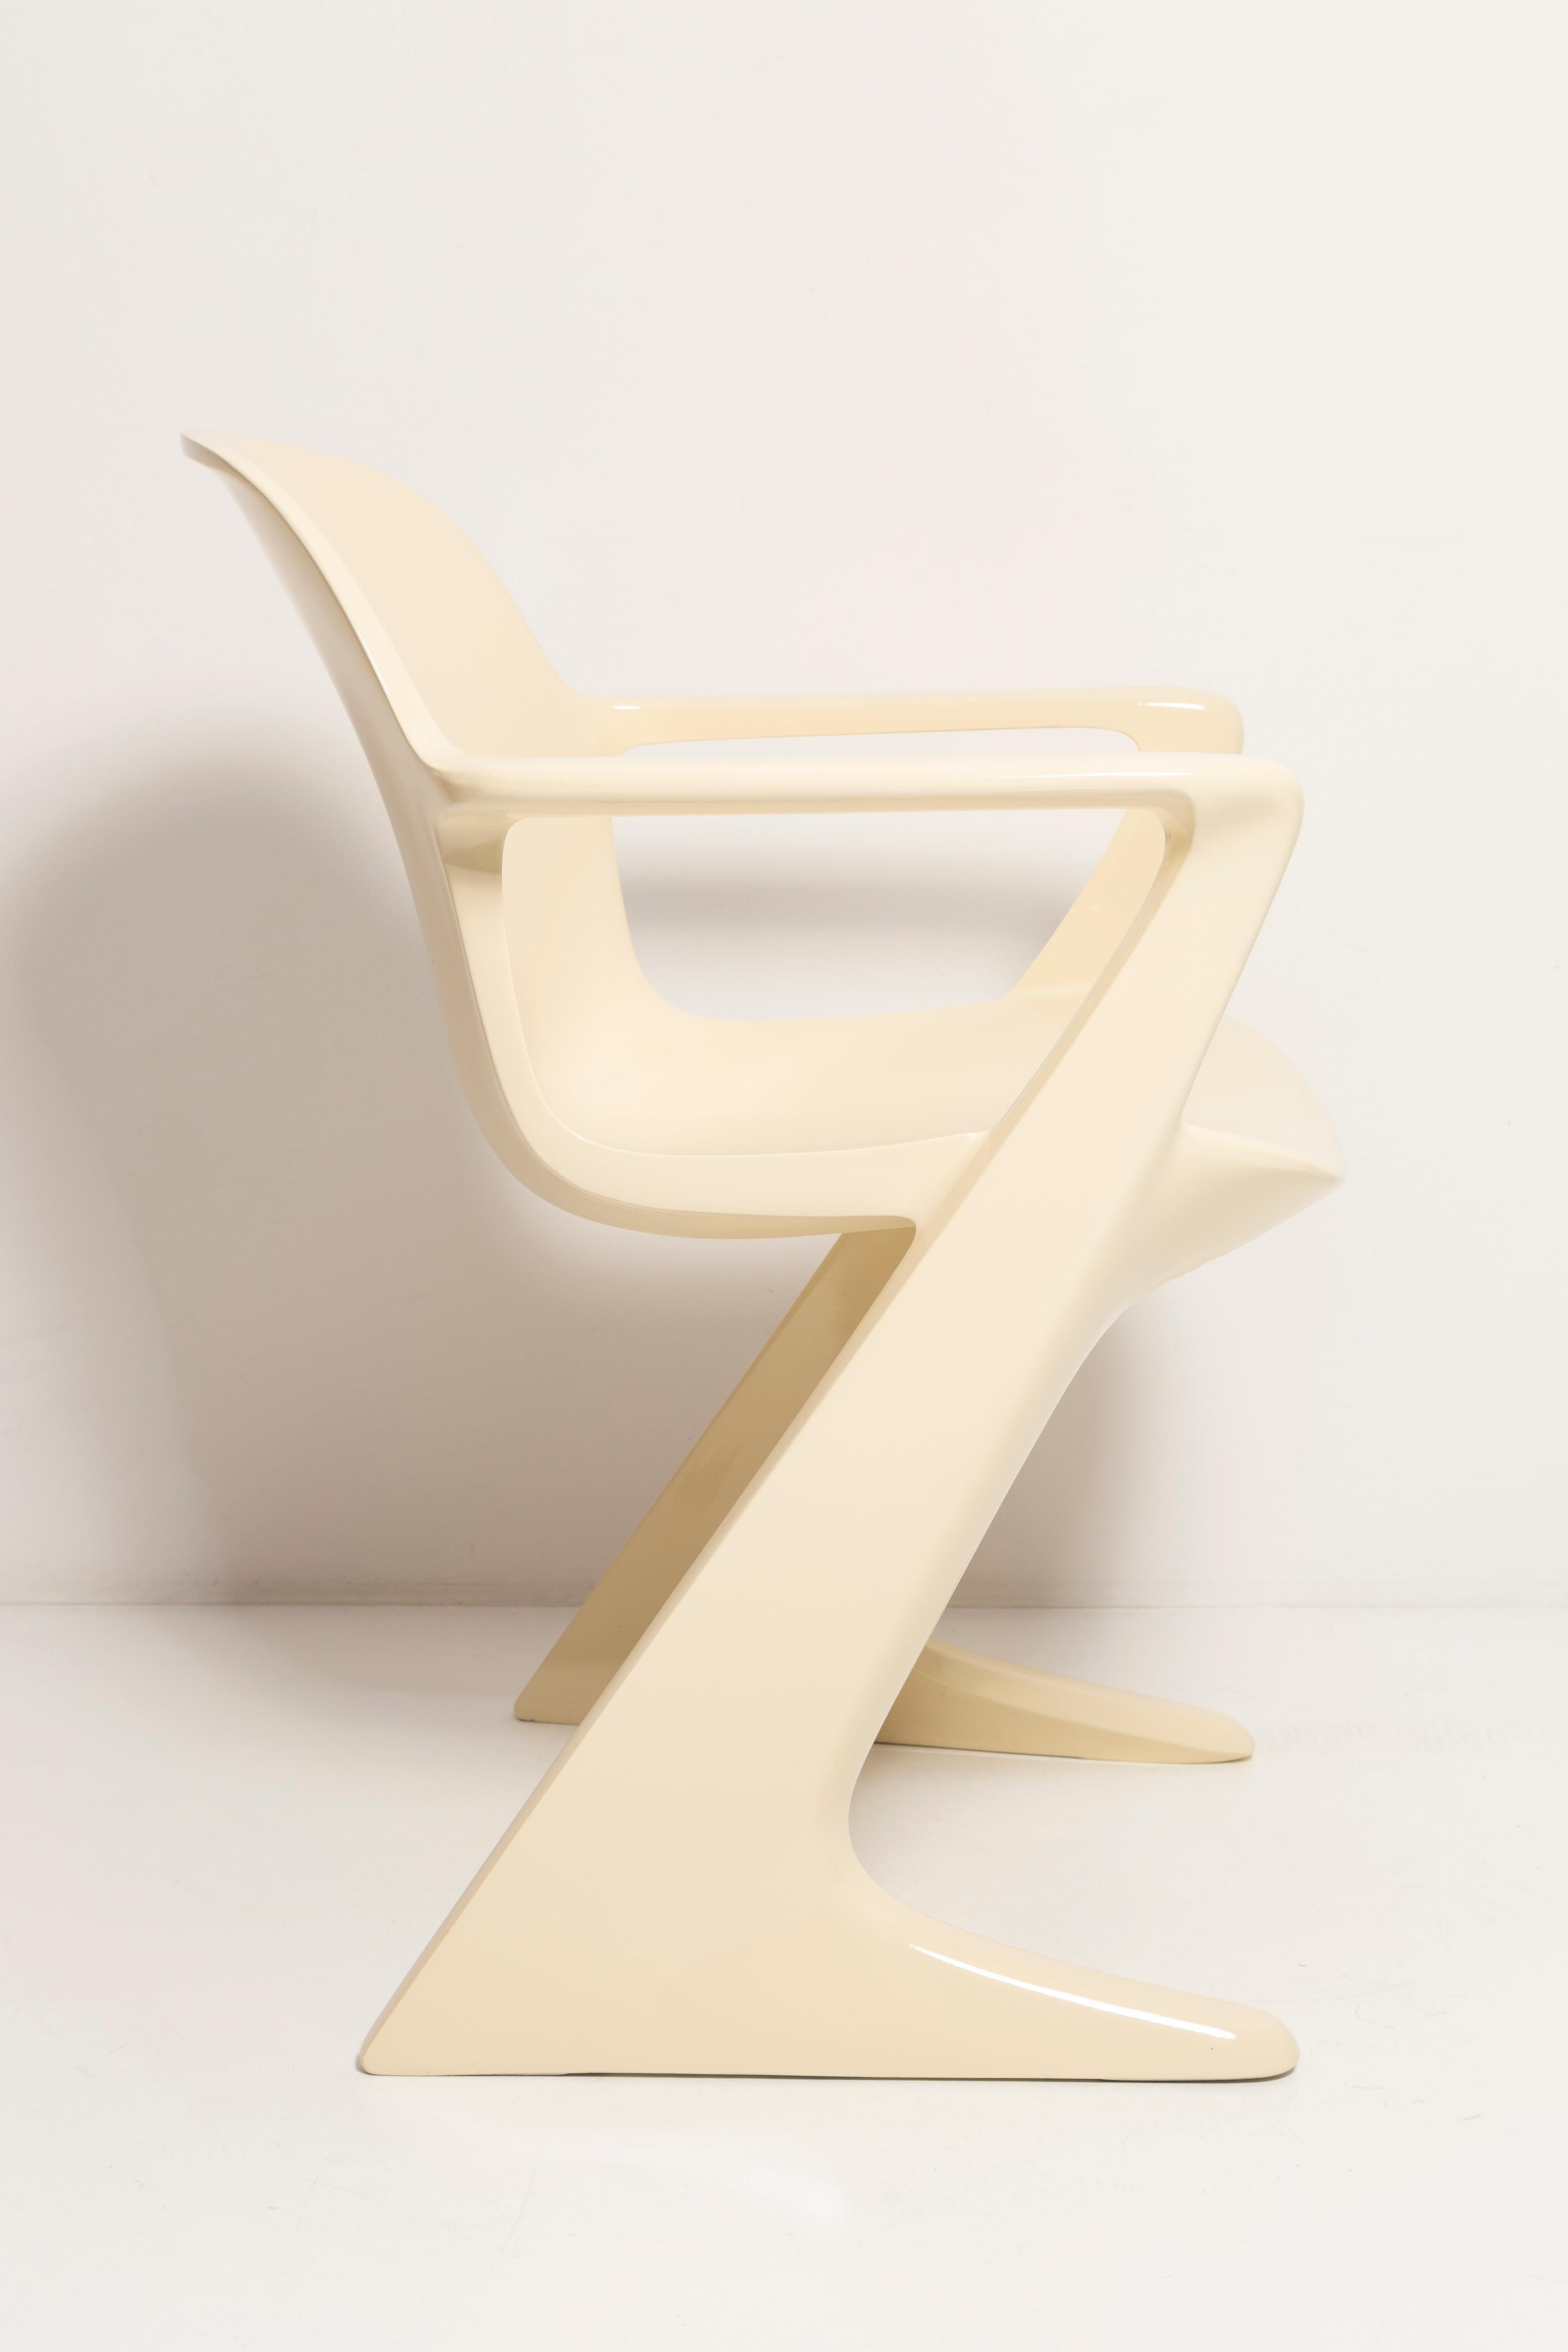 Lacquered Mid-Century Light Beige Kangaroo Chair Designed by Ernst Moeckl, Germany, 1968 For Sale